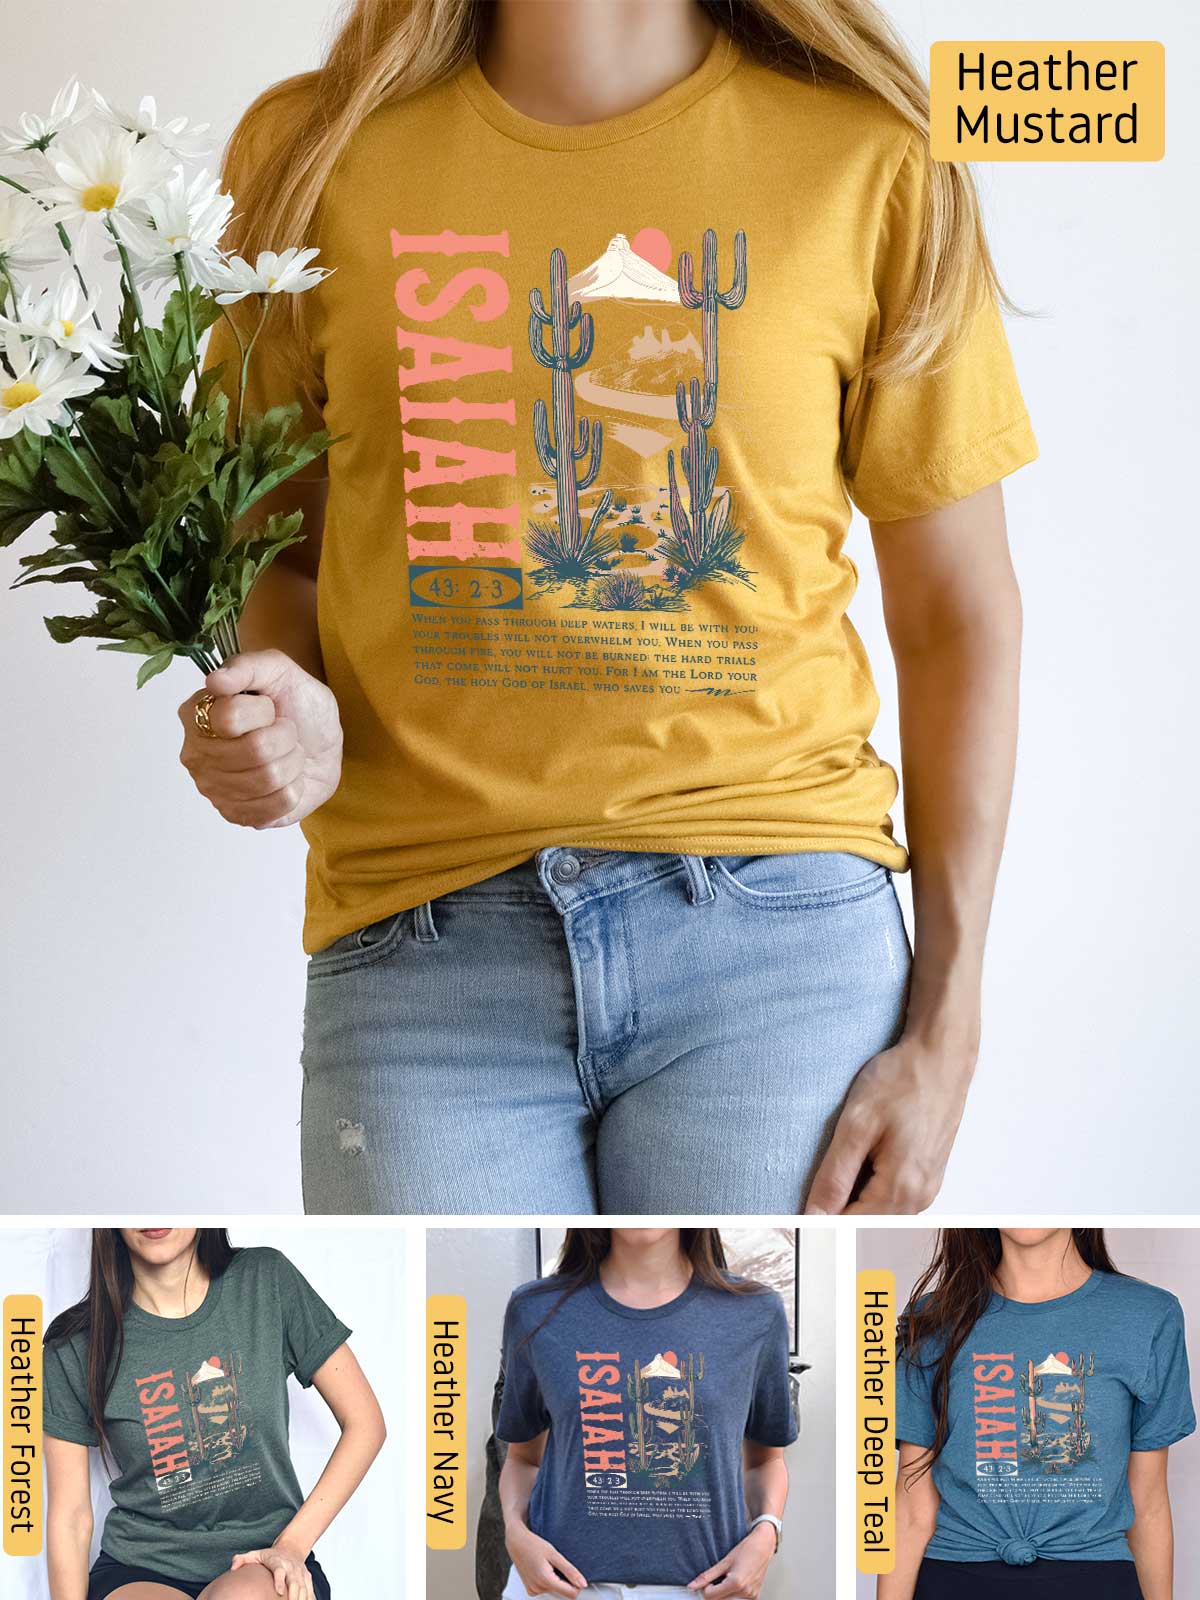 a woman wearing a mustard colored t - shirt with a cactus on it